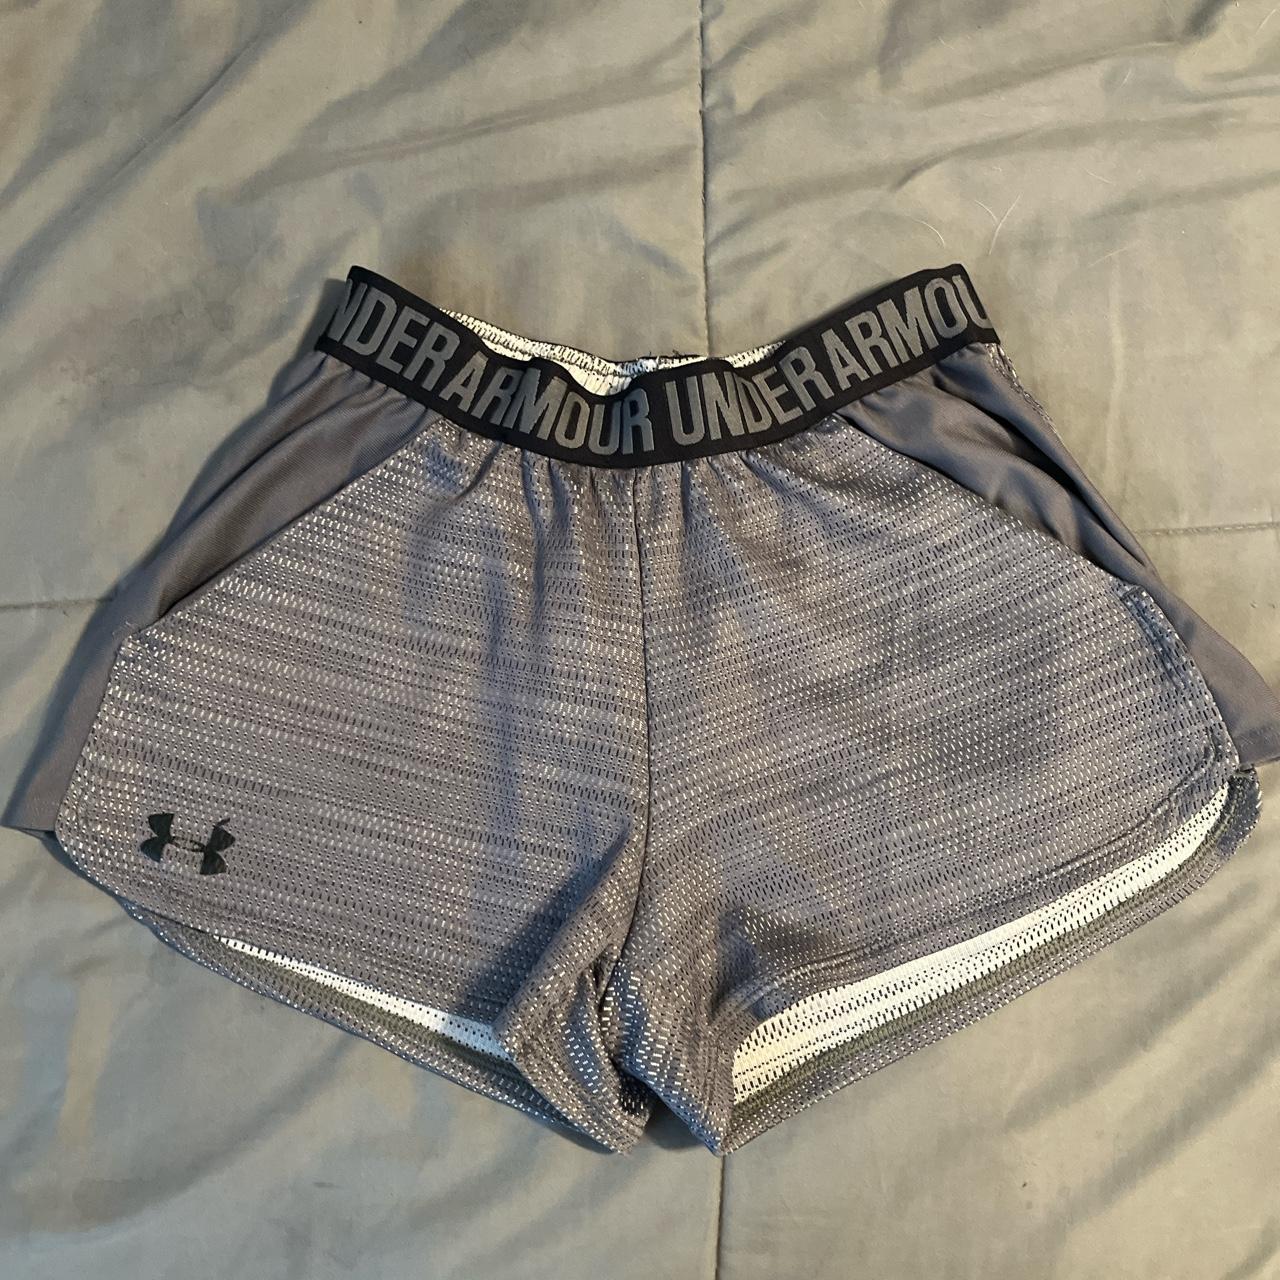 Under Armour Women's Grey and Black Shorts | Depop